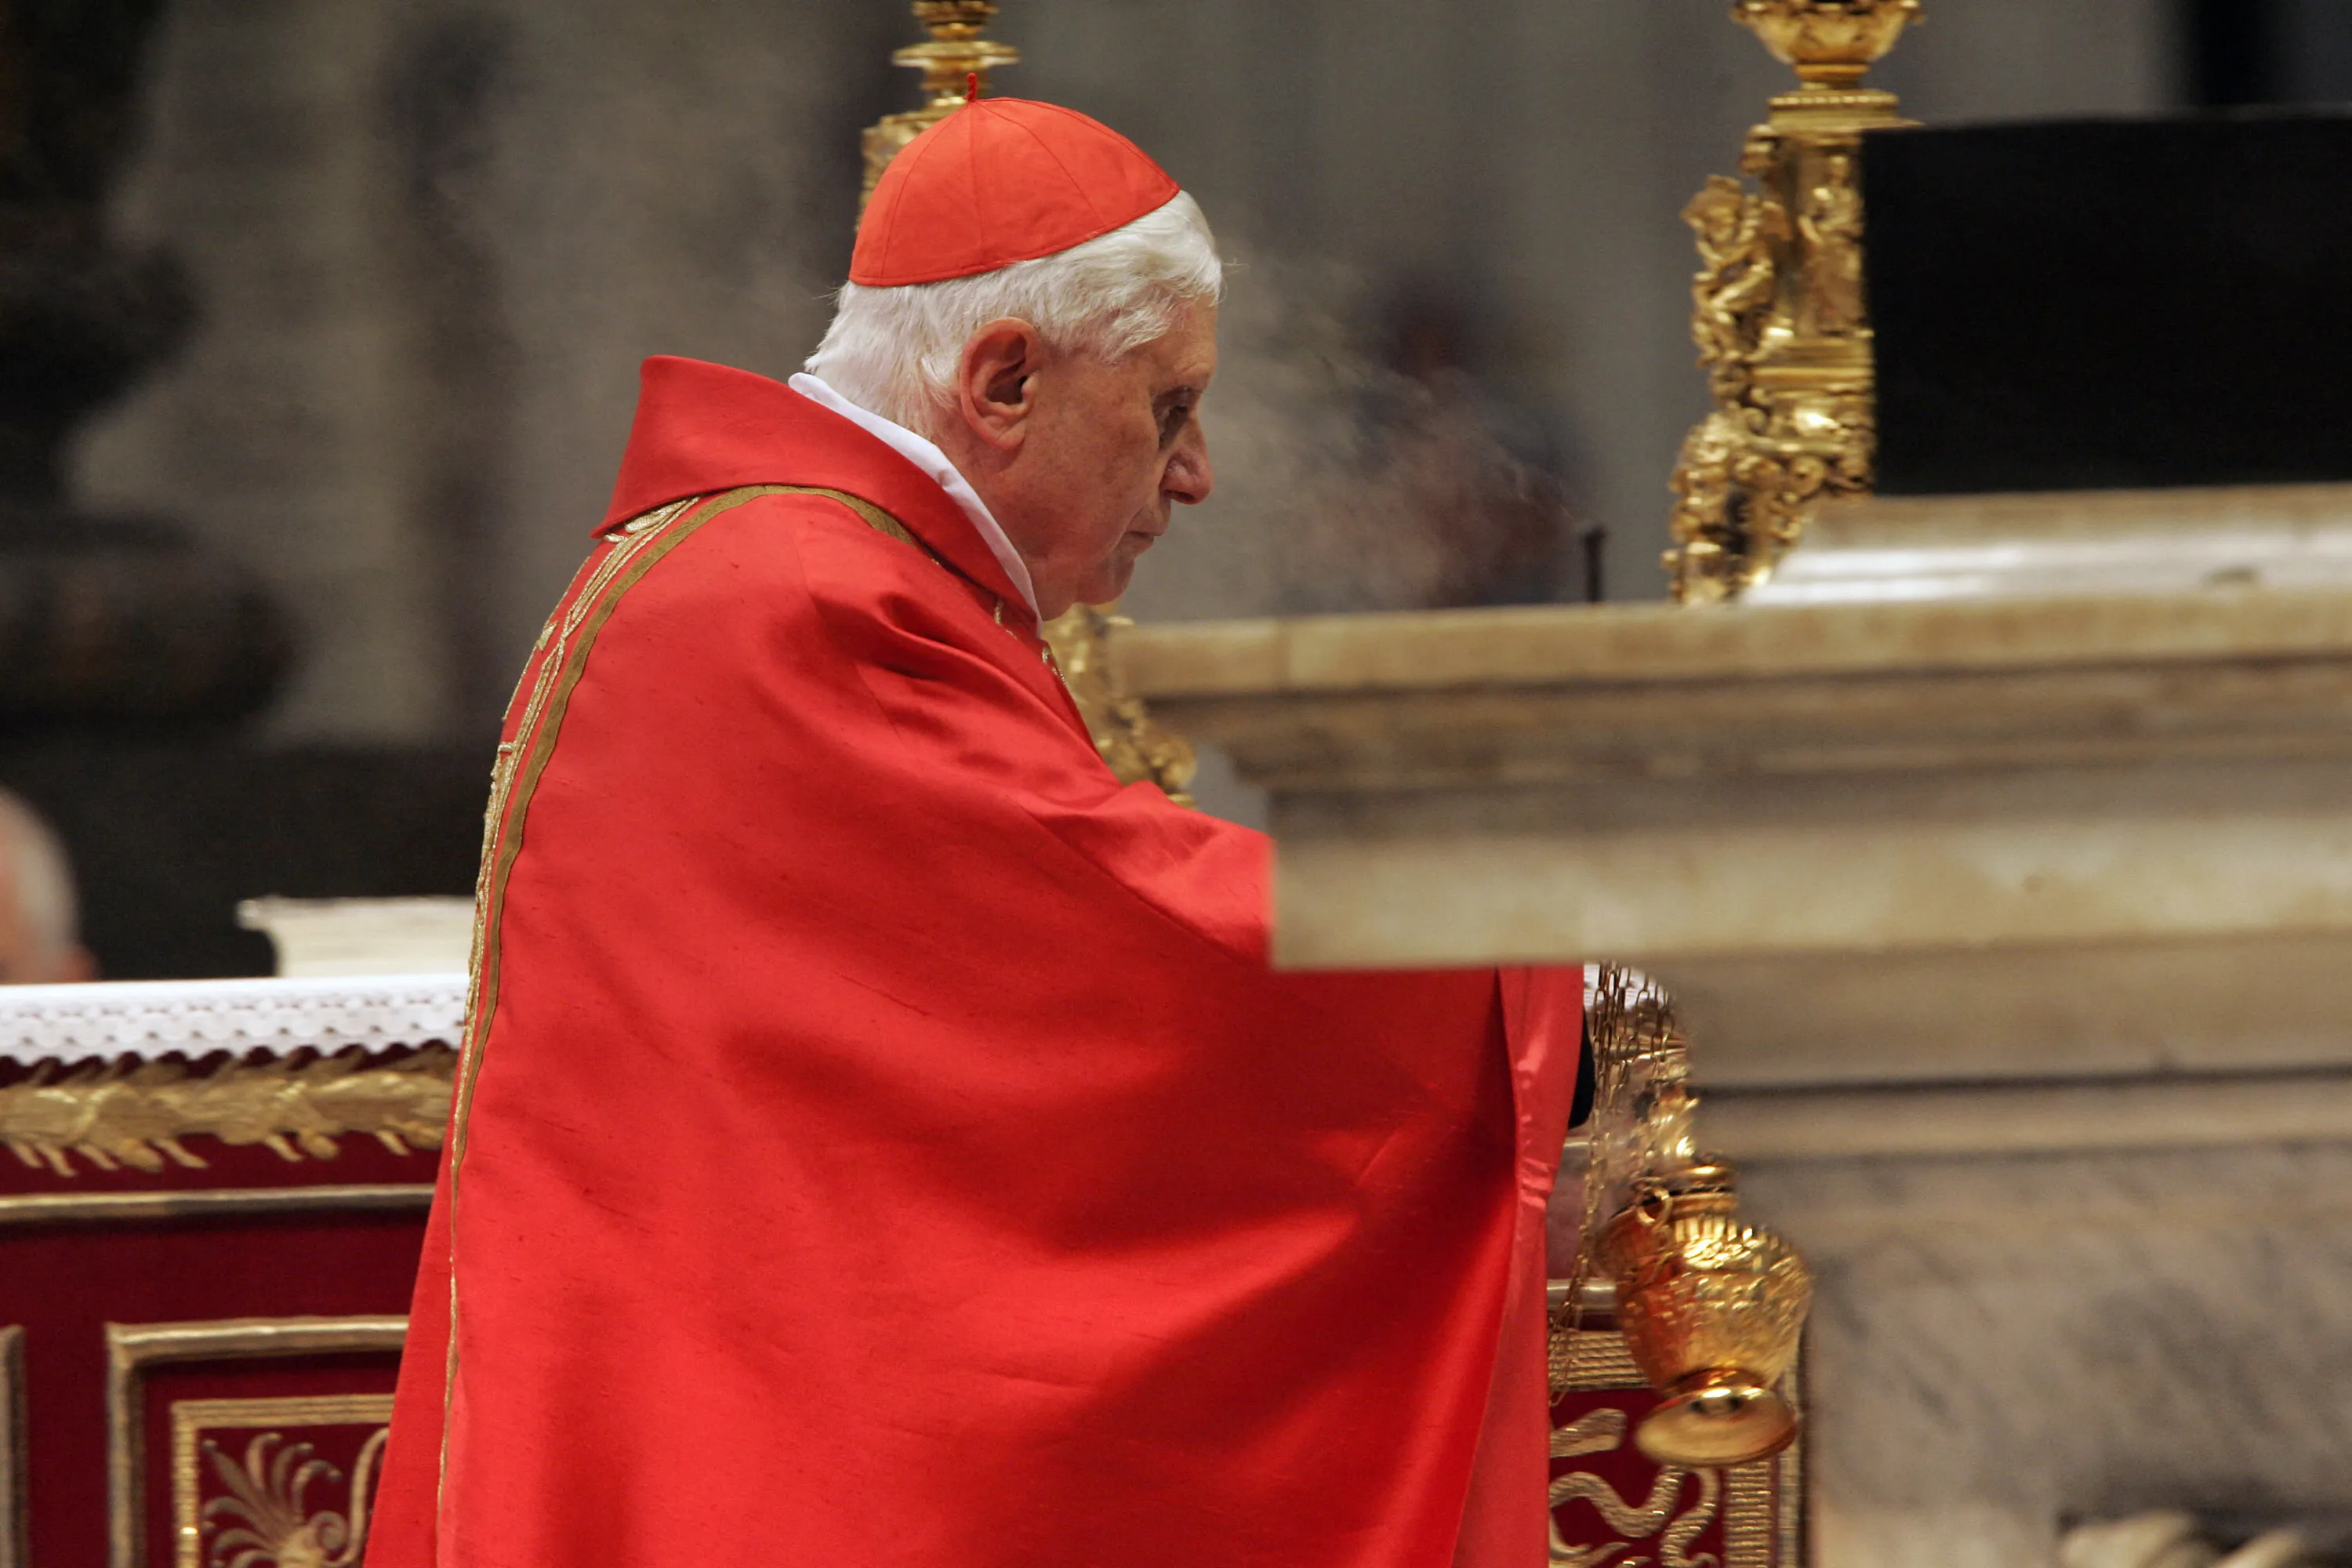 Cardinal Joseph Ratzinger celebrates the special "pro eligendo summo pontifice" (to elect Supreme Pontiff) Mass at St Peter's Basilica in the Vatican City on April 18, 2005.?w=200&h=150